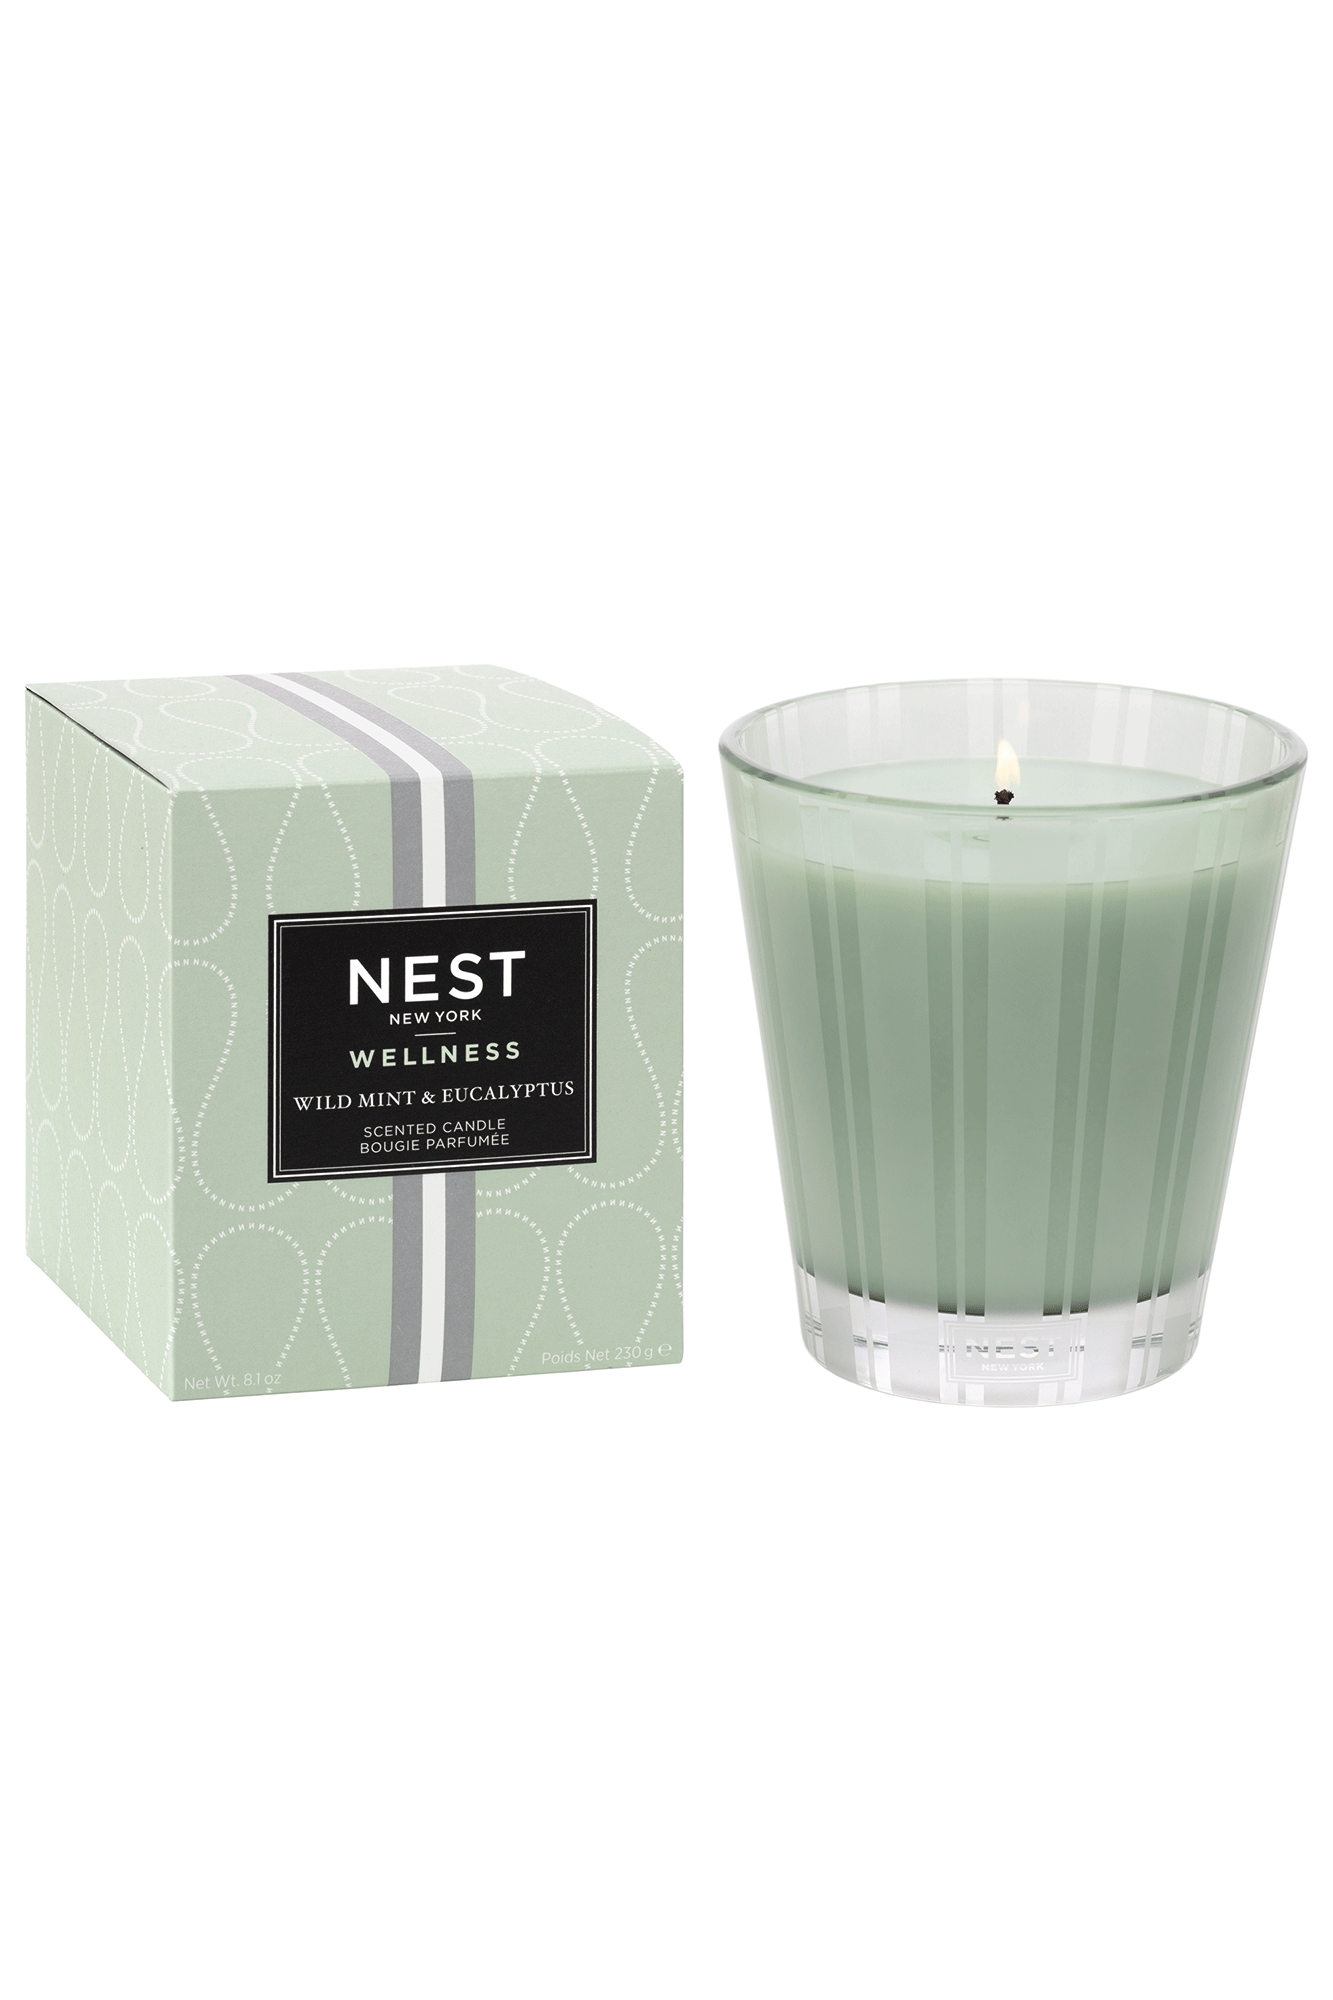 Enhance your space with the premium aromatherapy of the Wild Mint & Eucalyptus Classic Candle. Infused with essential oils of basil and Thai ginger, this candle offers a gentle scent of wild mint and eucalyptus to refresh your environment and stimulate your senses.